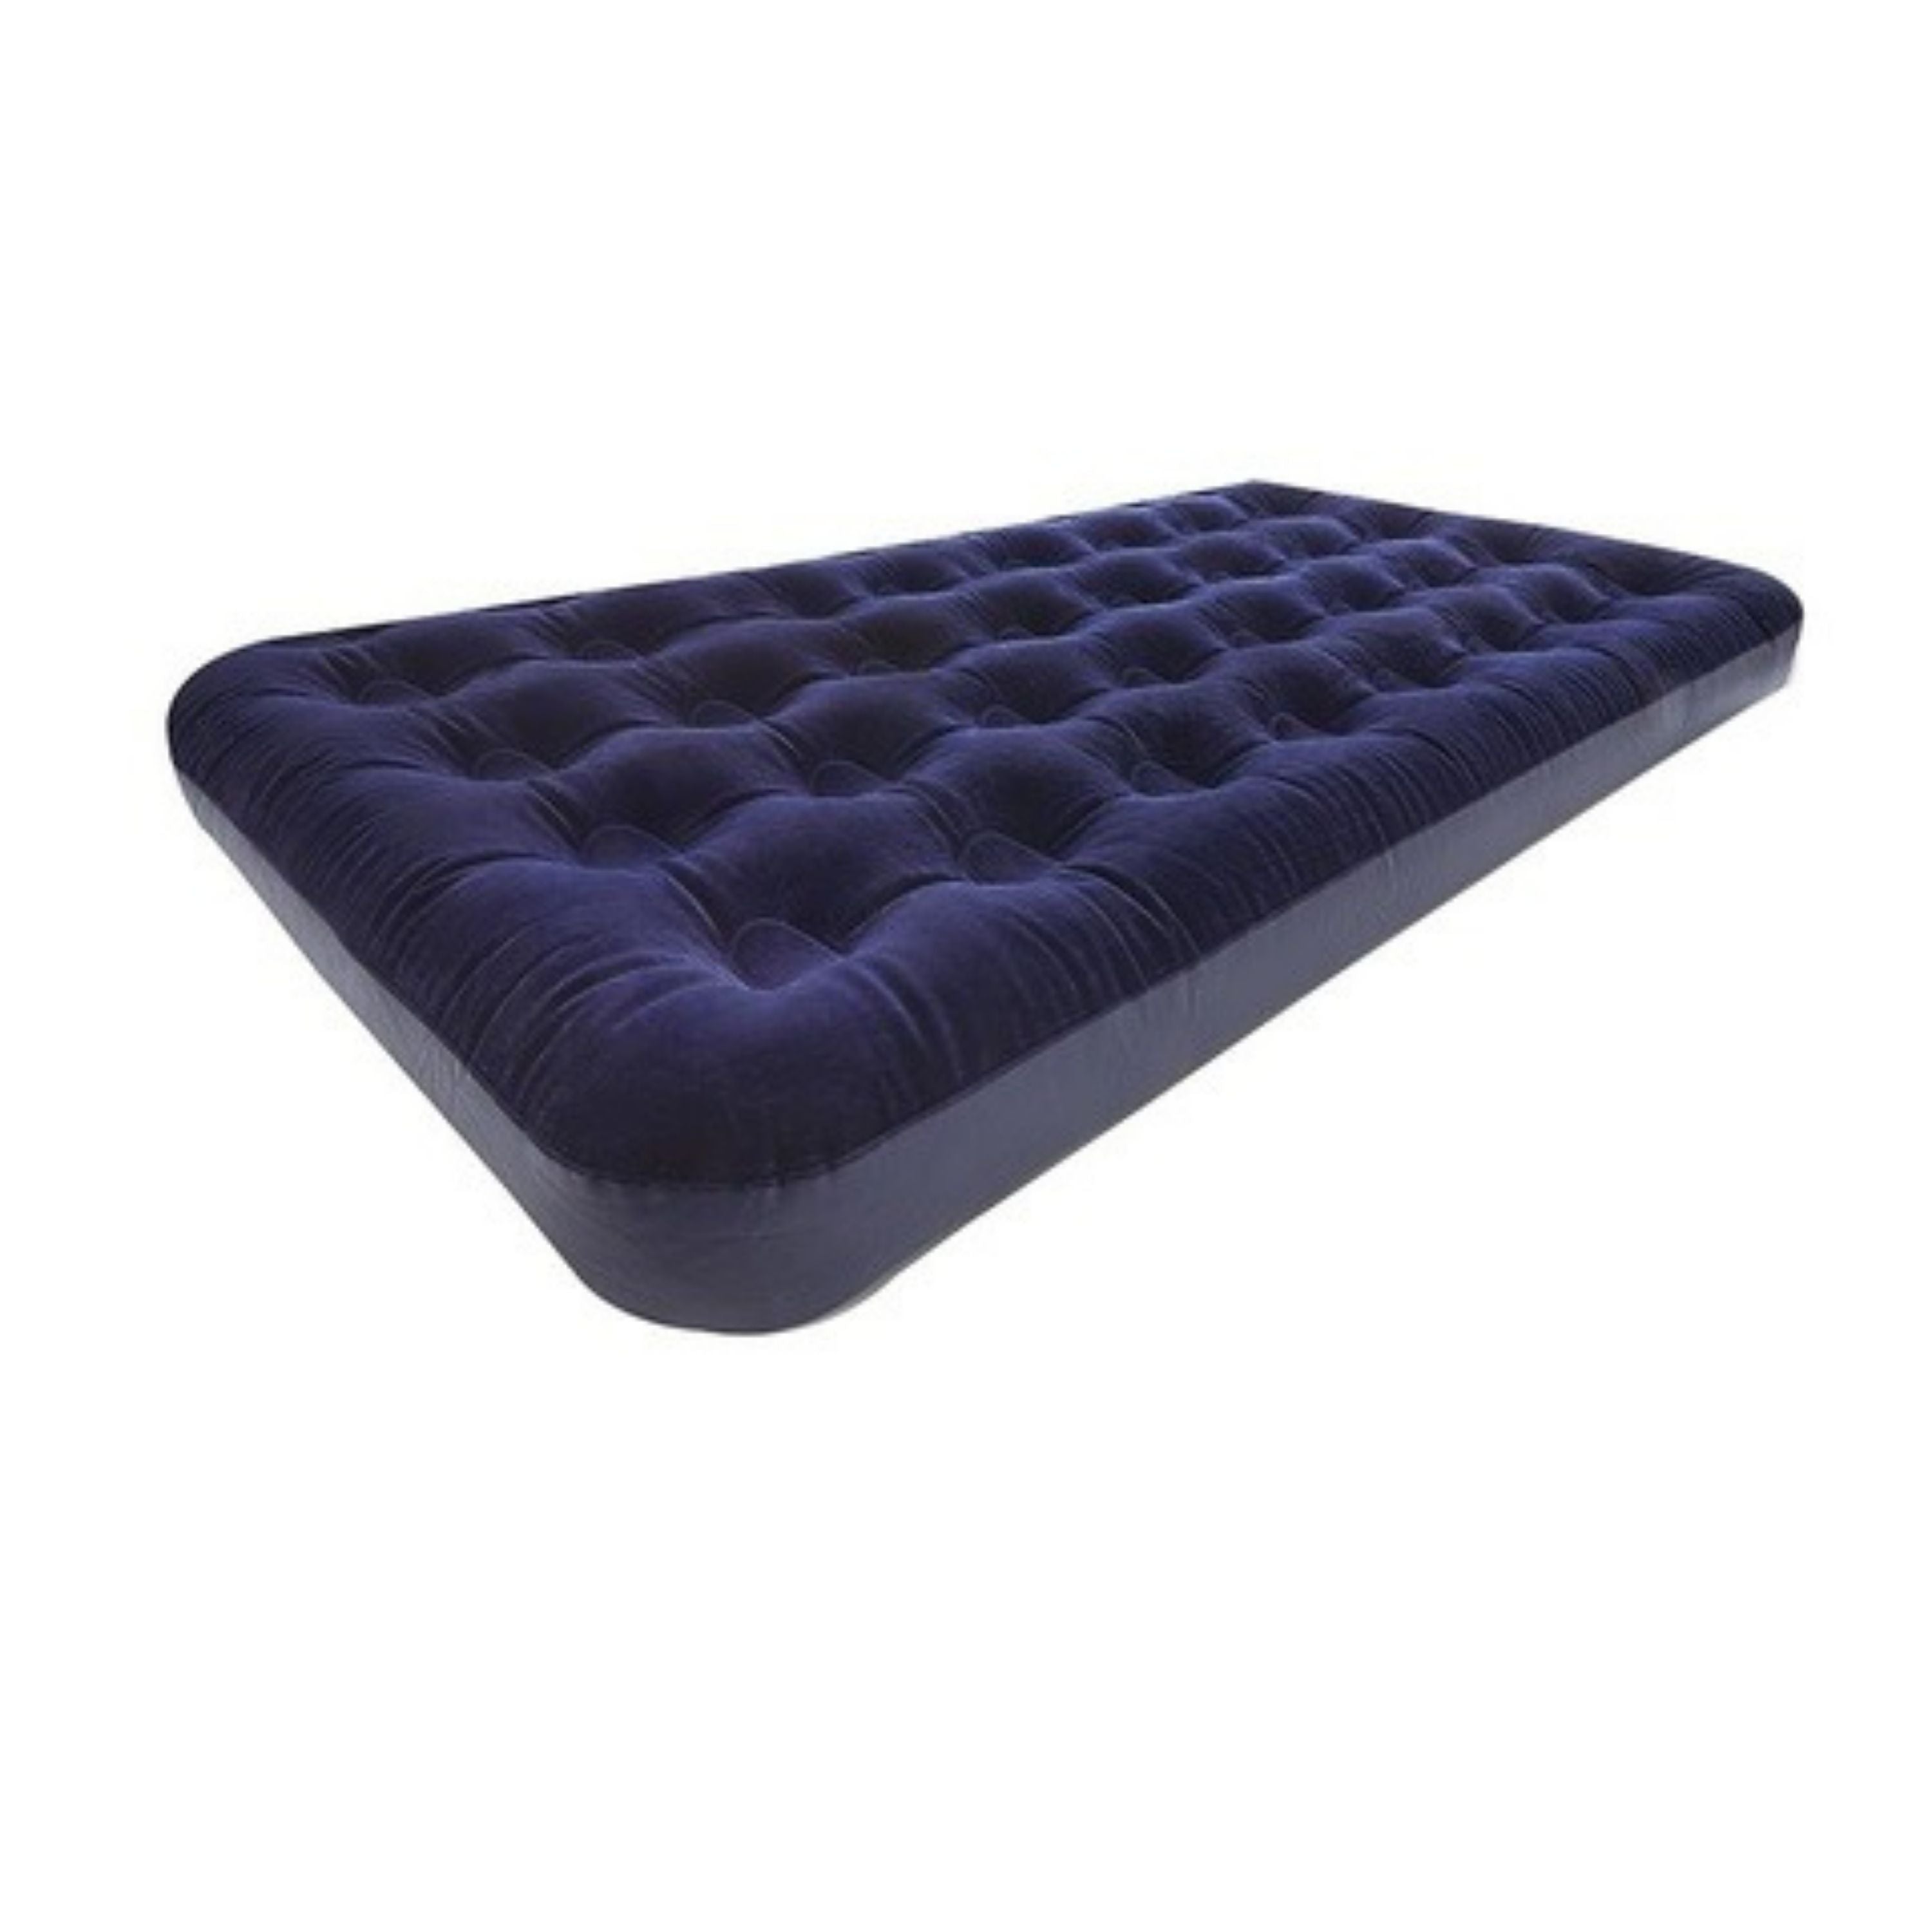 Matelas gonflable - simple||Air mattress - single